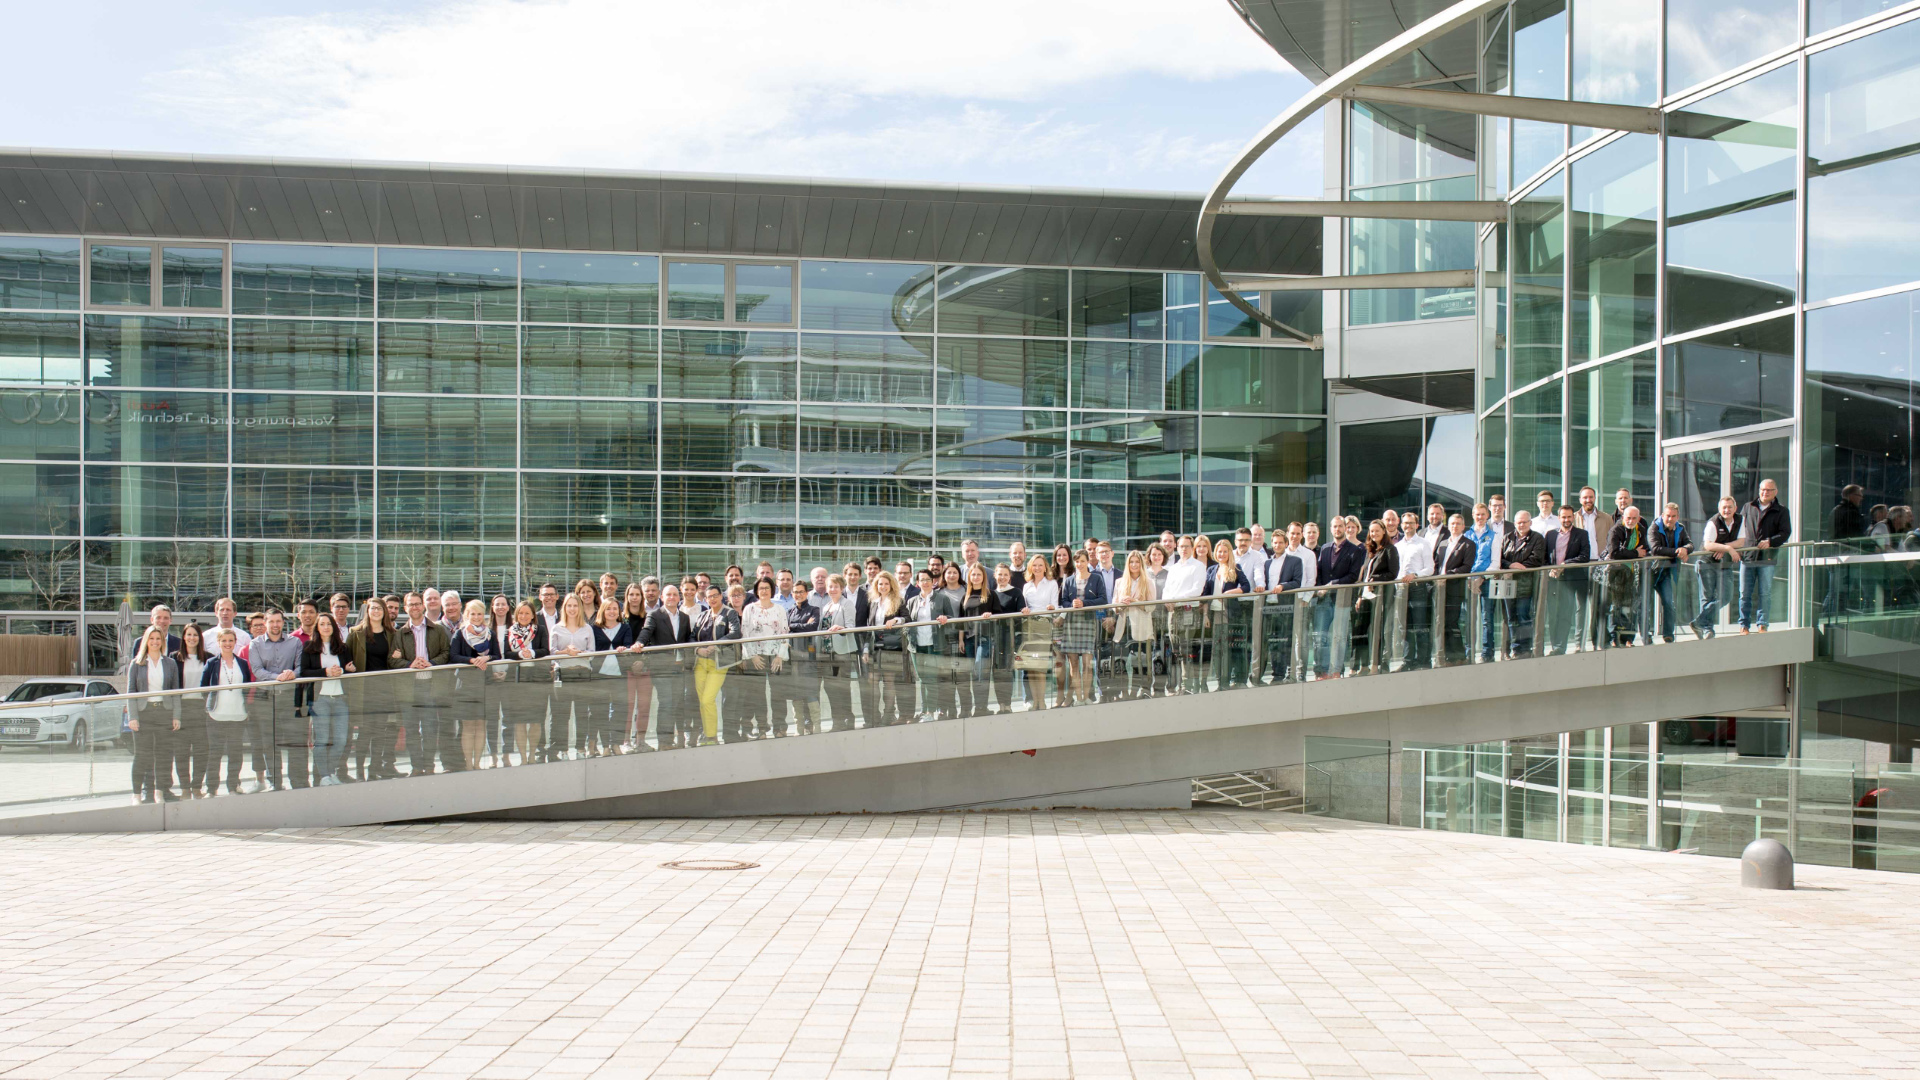 The 100 or so employees of Audi Consulting on a ramp outside the building in Ingolstadt.